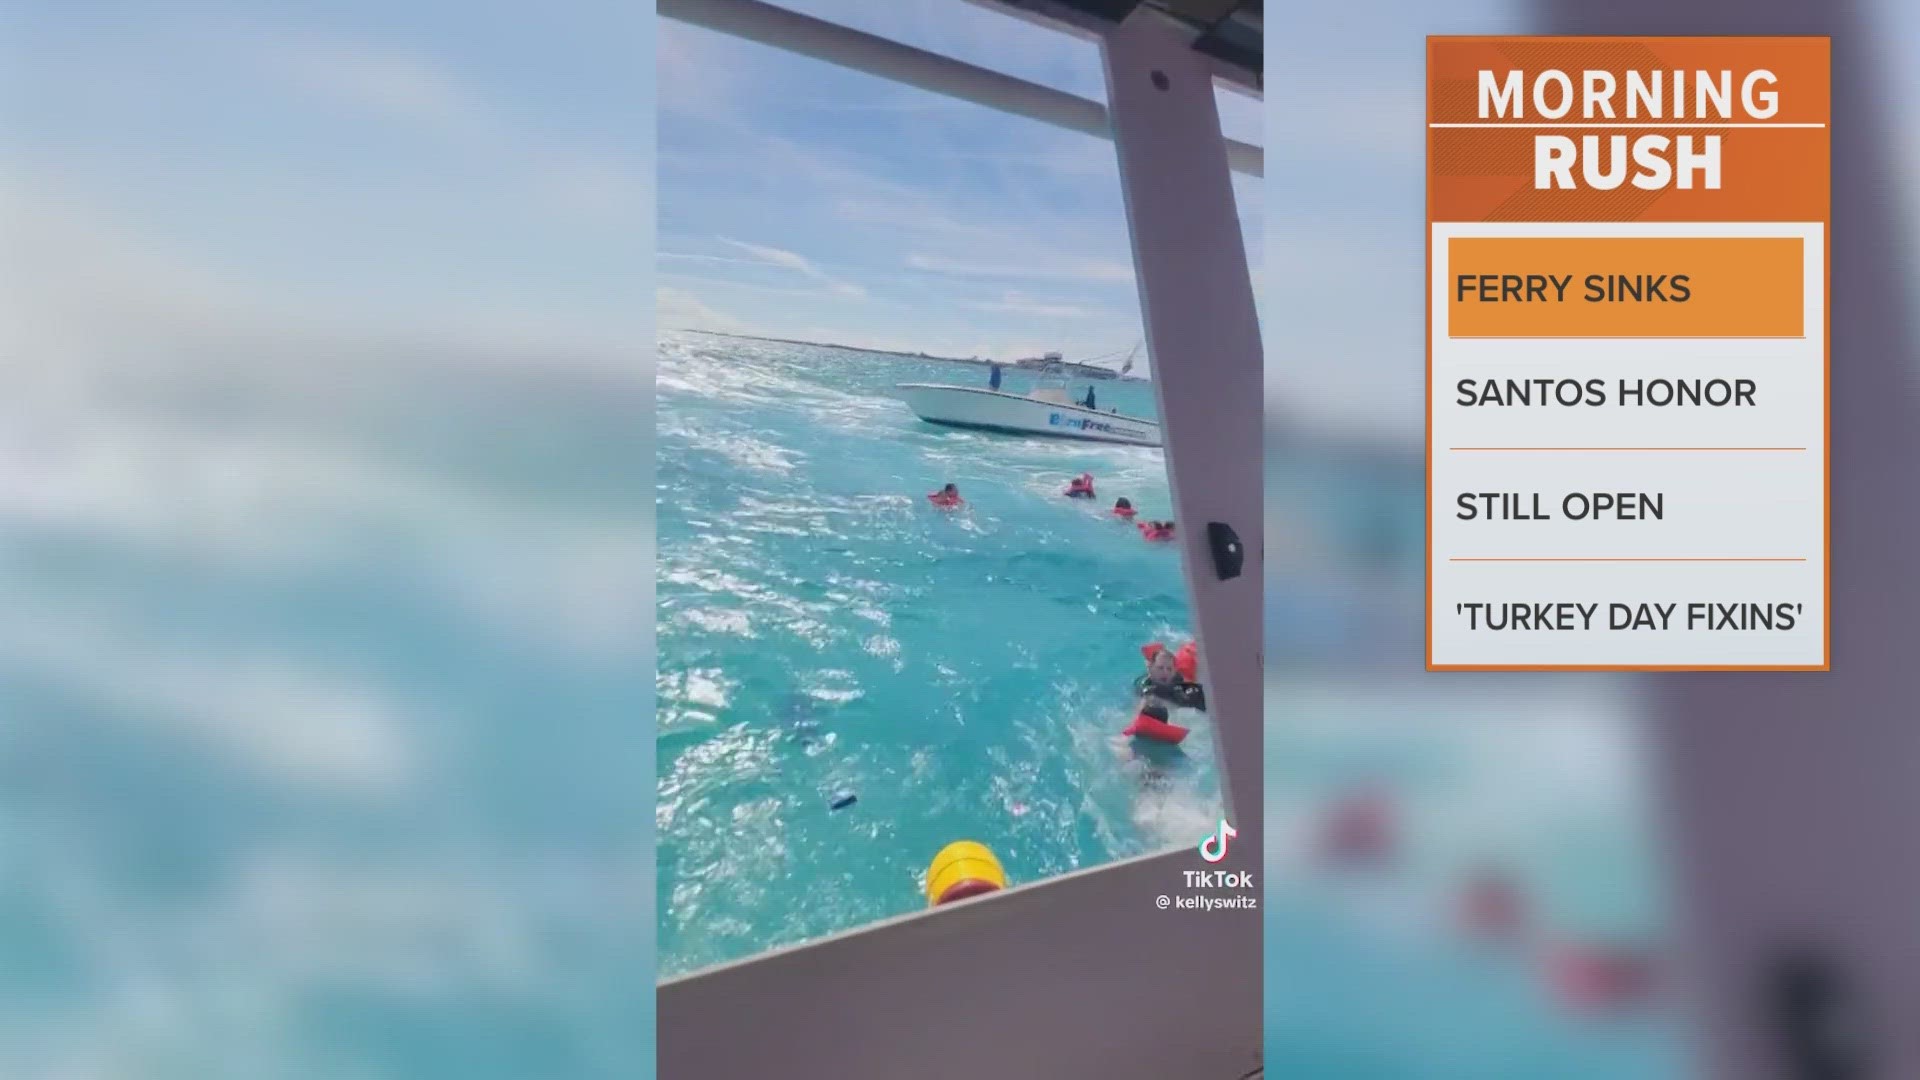 The 74-year-old woman was on a five-day vacation with her family when the catamaran sank late Tuesday morning.